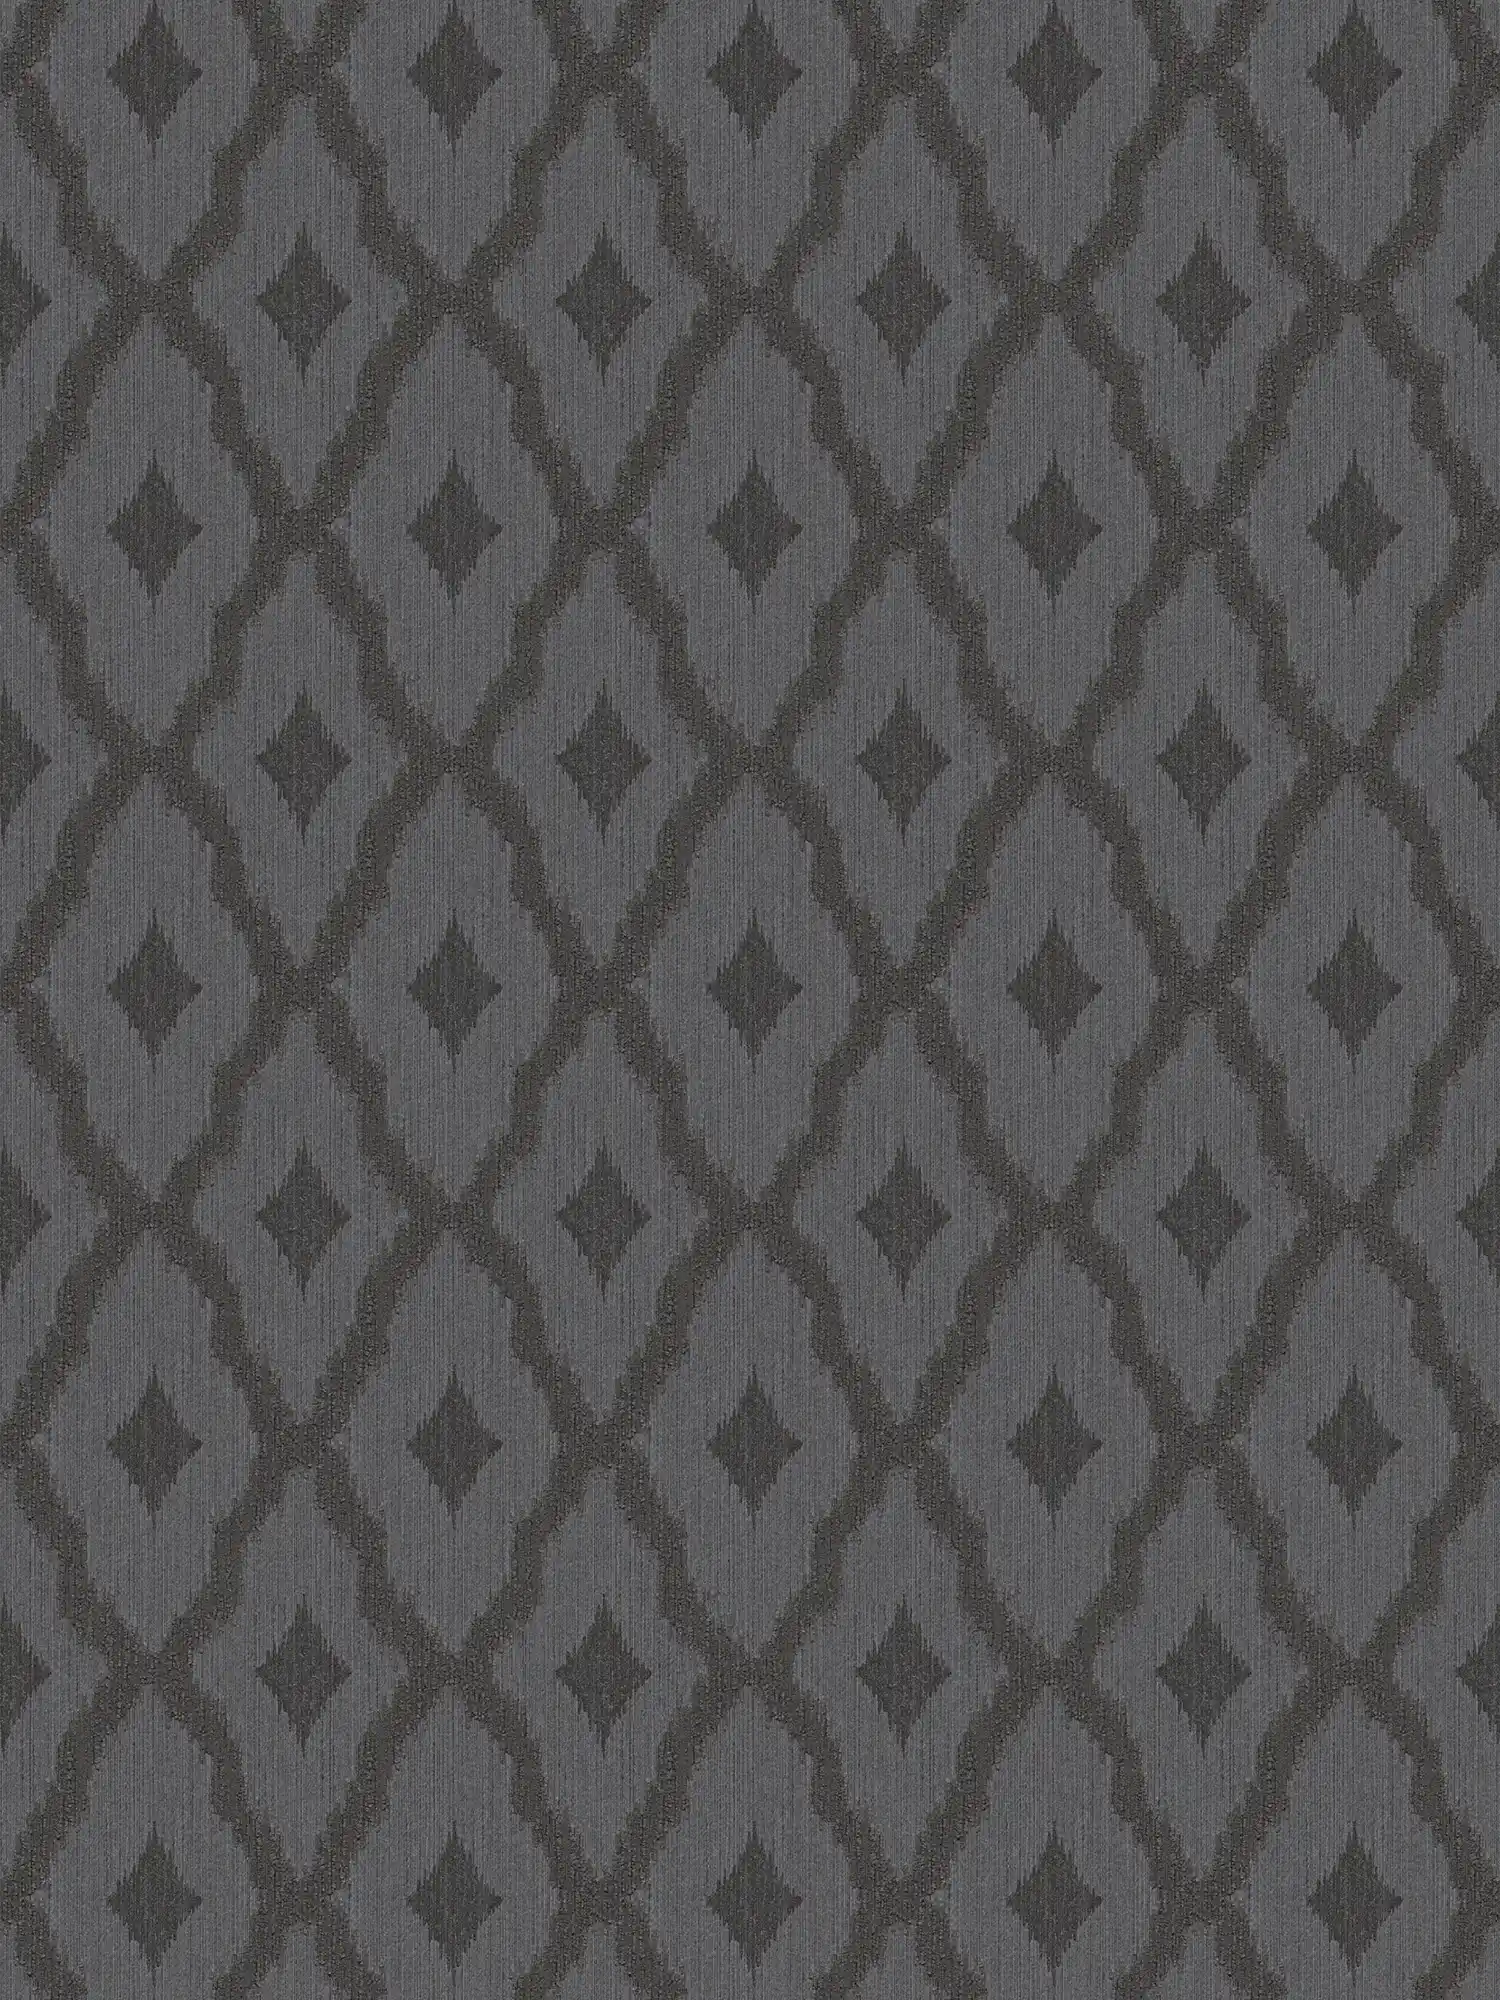 Pattern wallpaper ikat style with textile texture - brown
